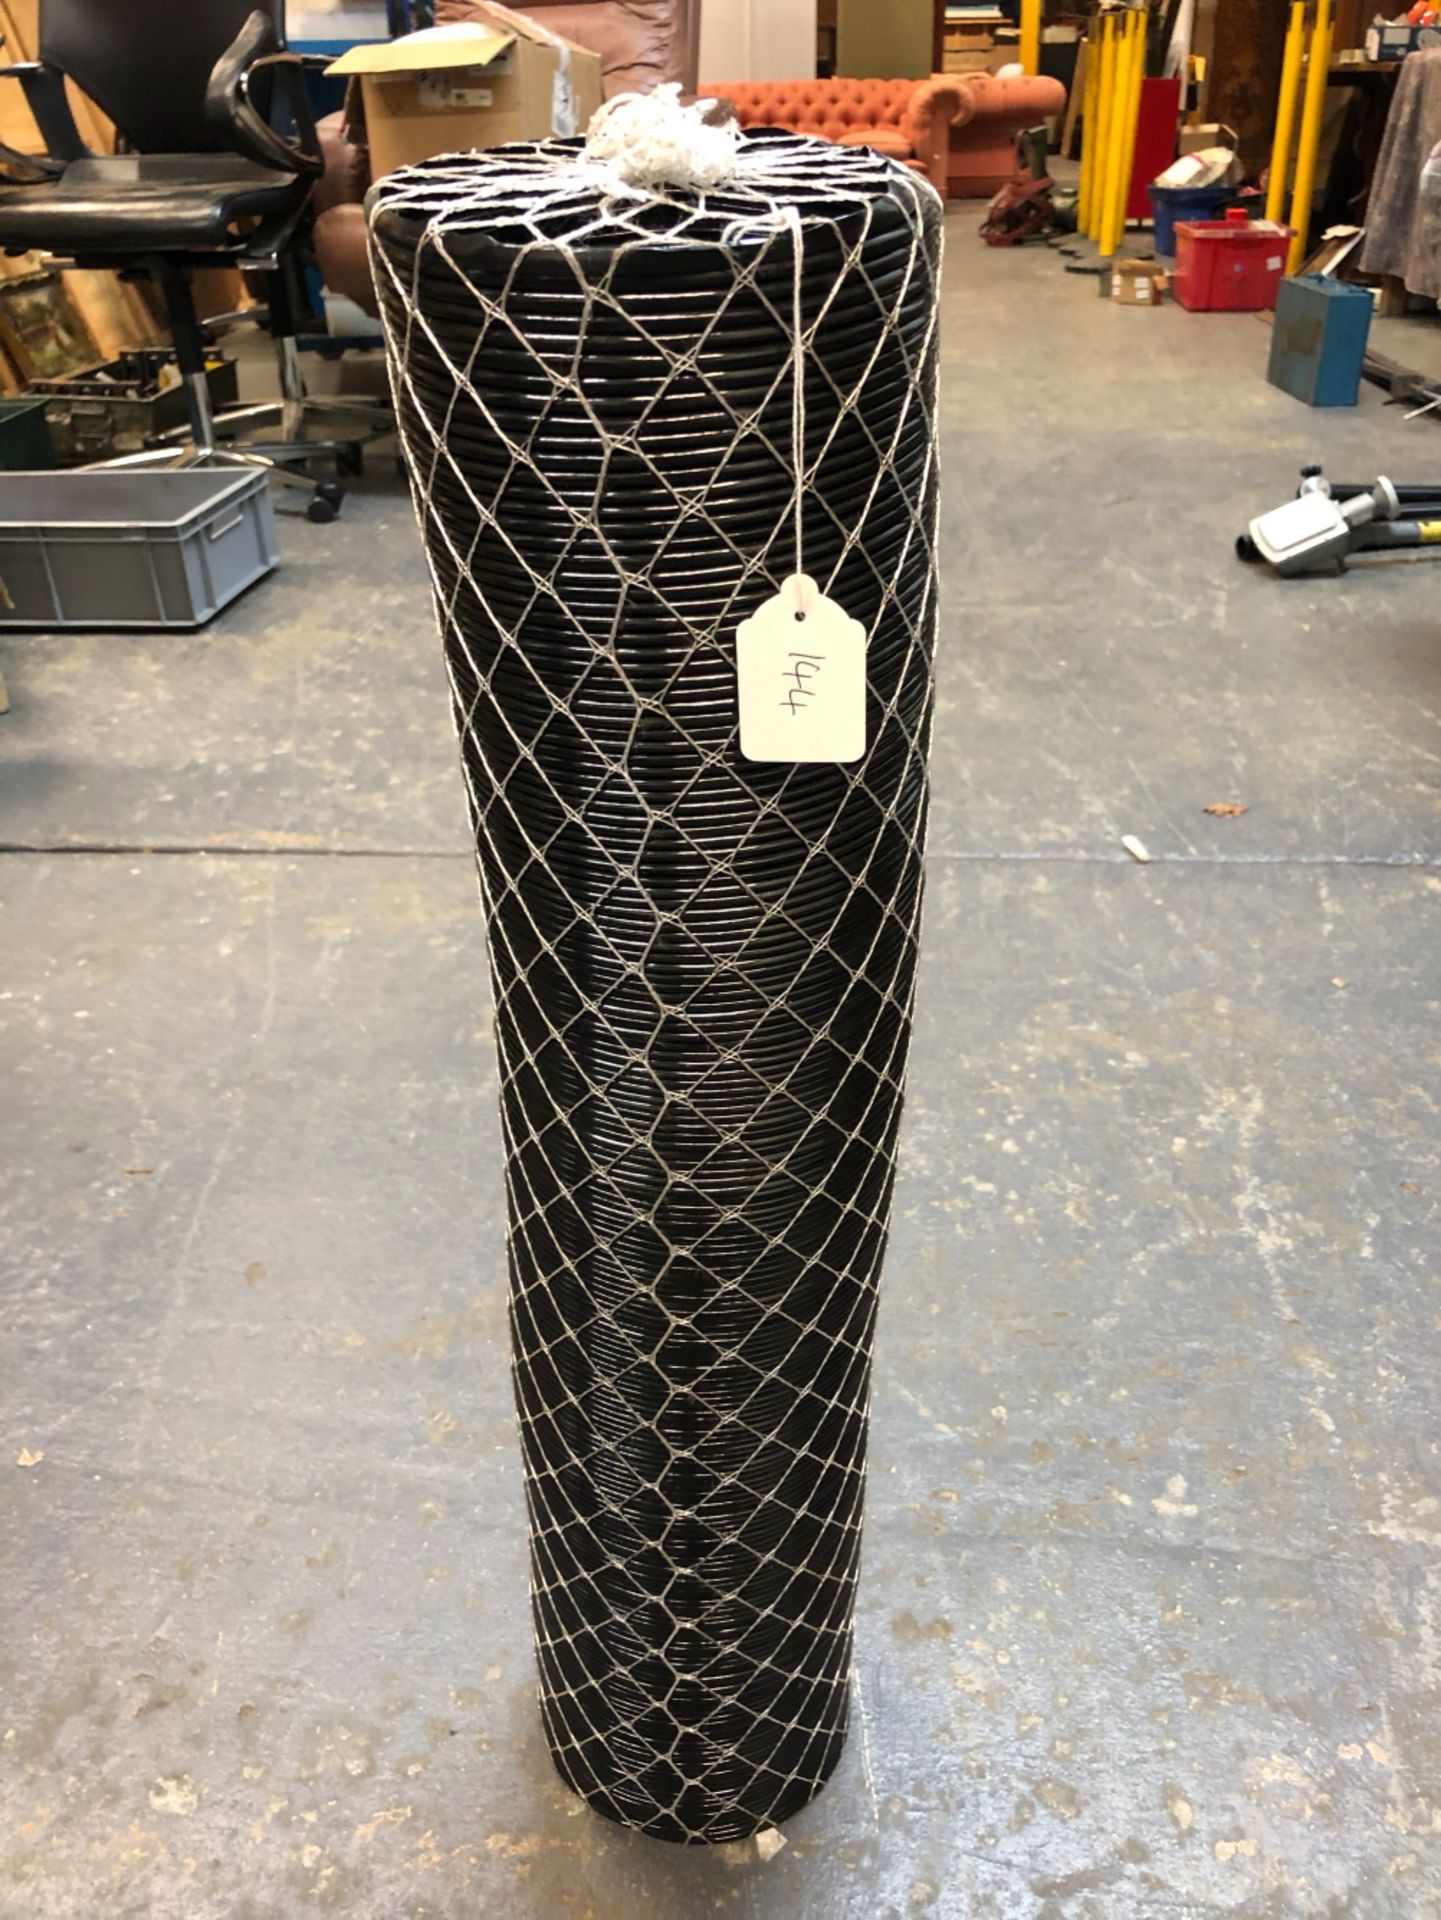 A LENGTH OF FLEXIBLE PLASTIC DUCTING (6 INCH DIA)